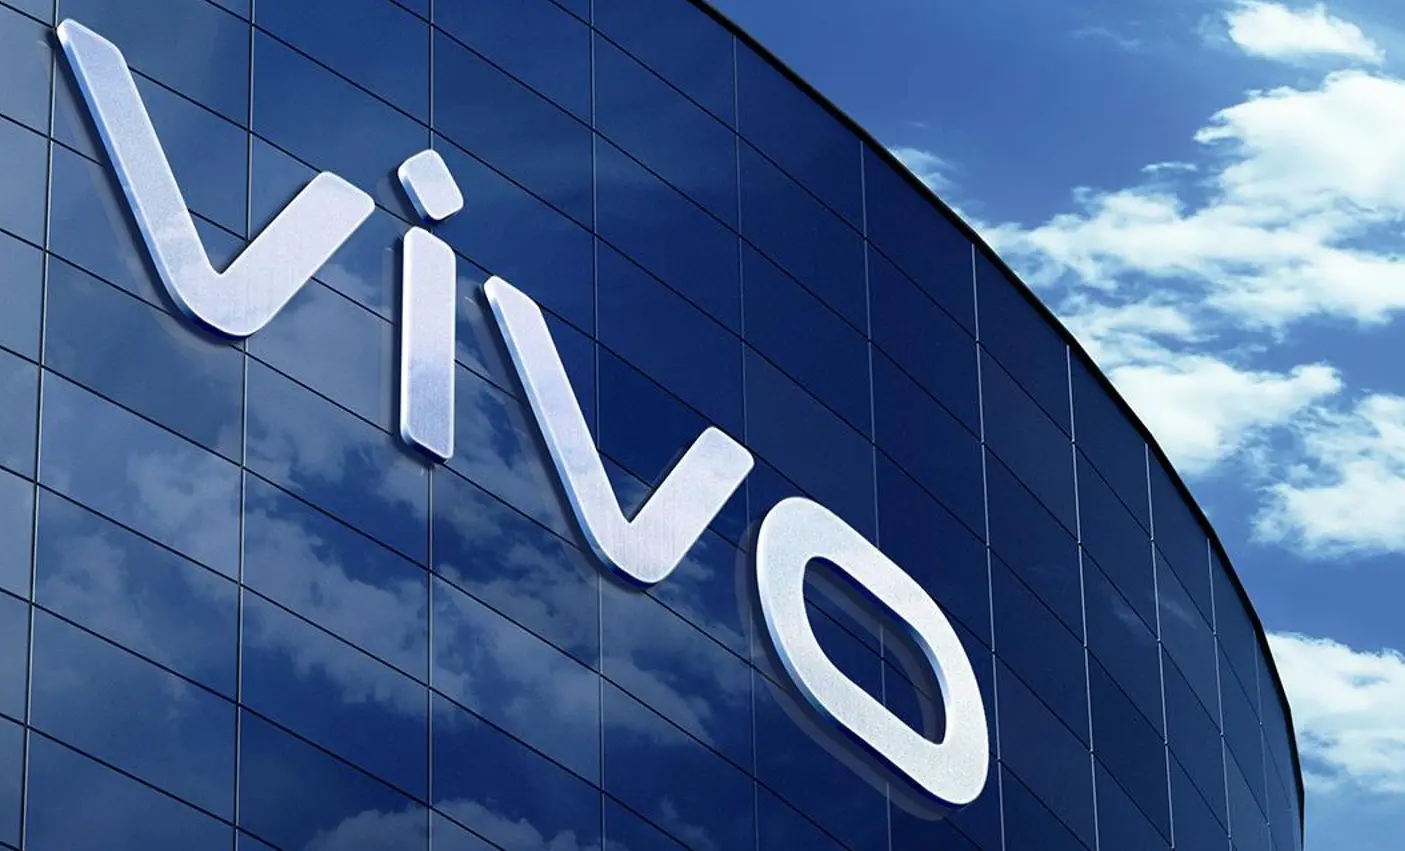 Vivo diverted Rs 62,476 crore to China to dodge taxes in India, says ED